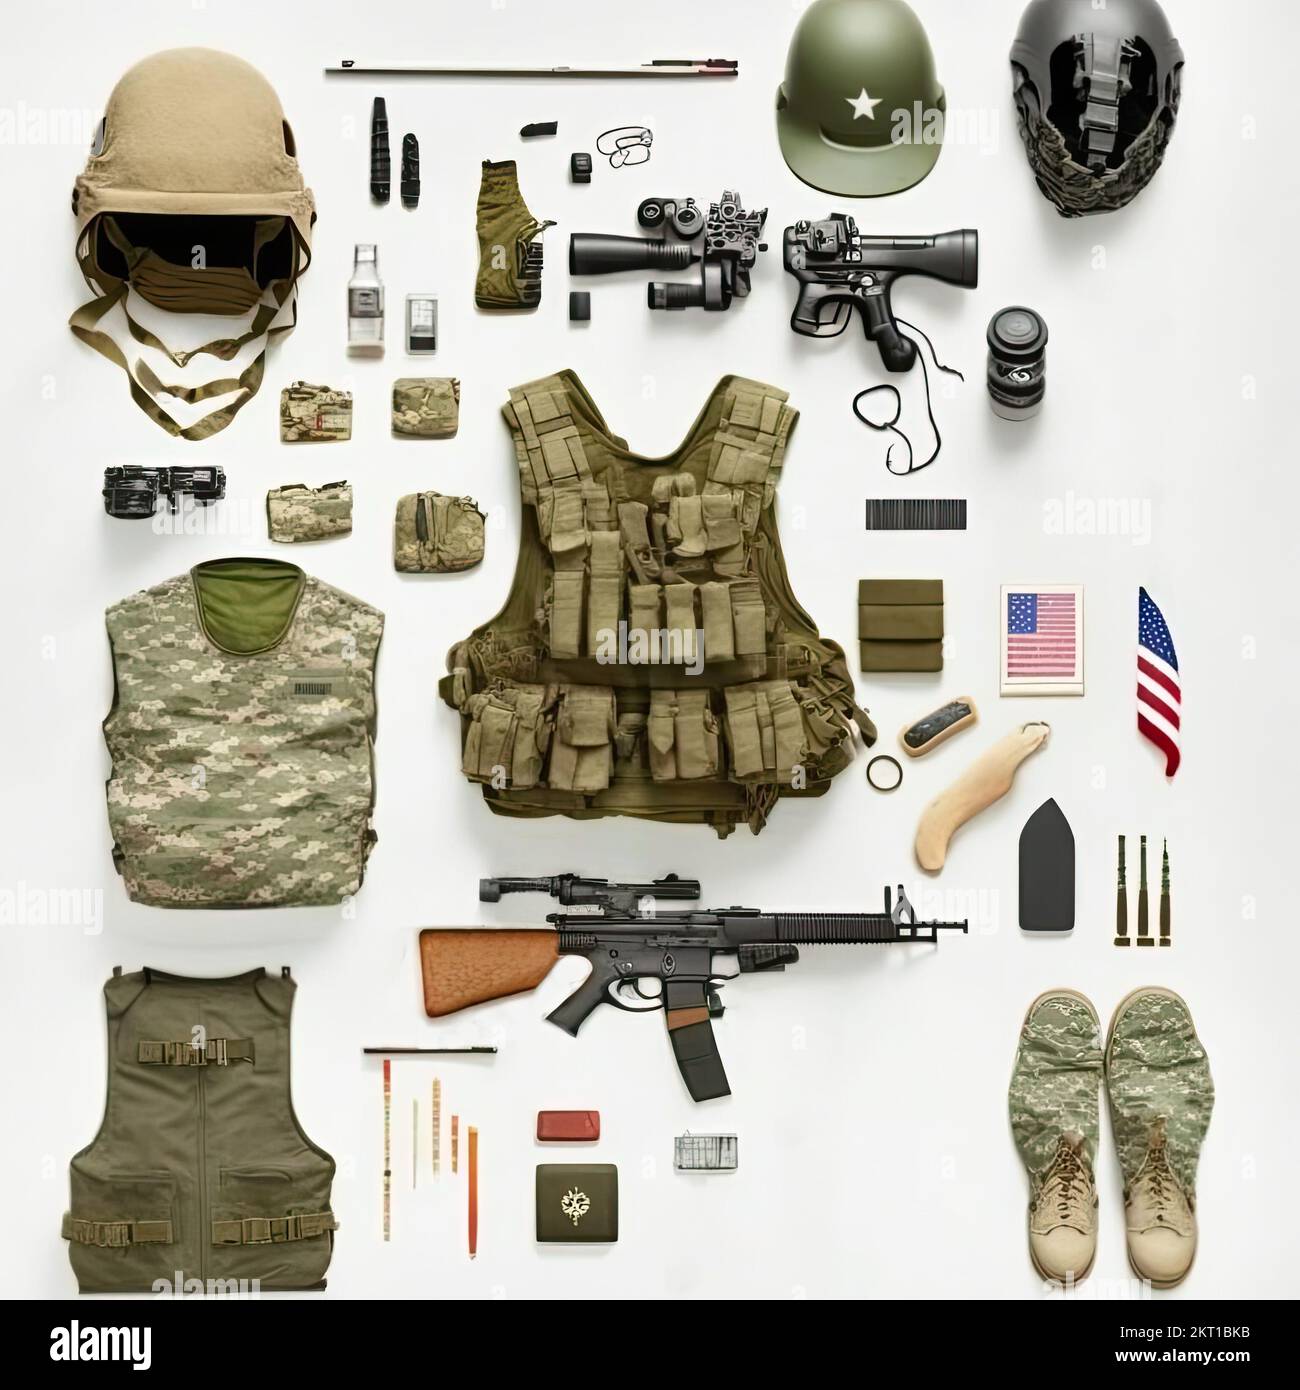 Image of Set of American soldier's accoutrements